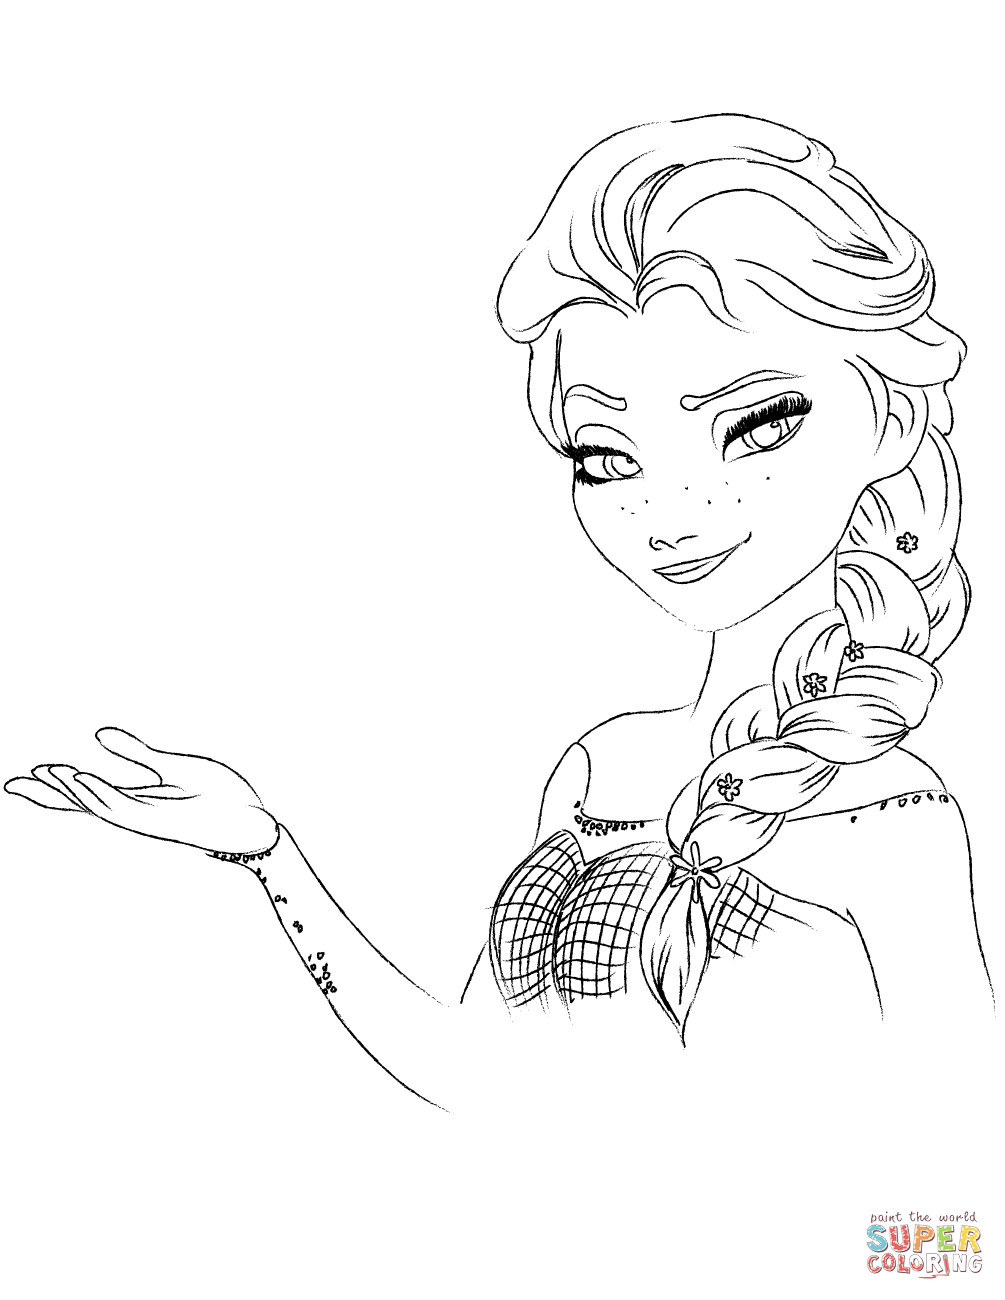 Elsa Coloring Sheet
 Elsa from The Frozen coloring page